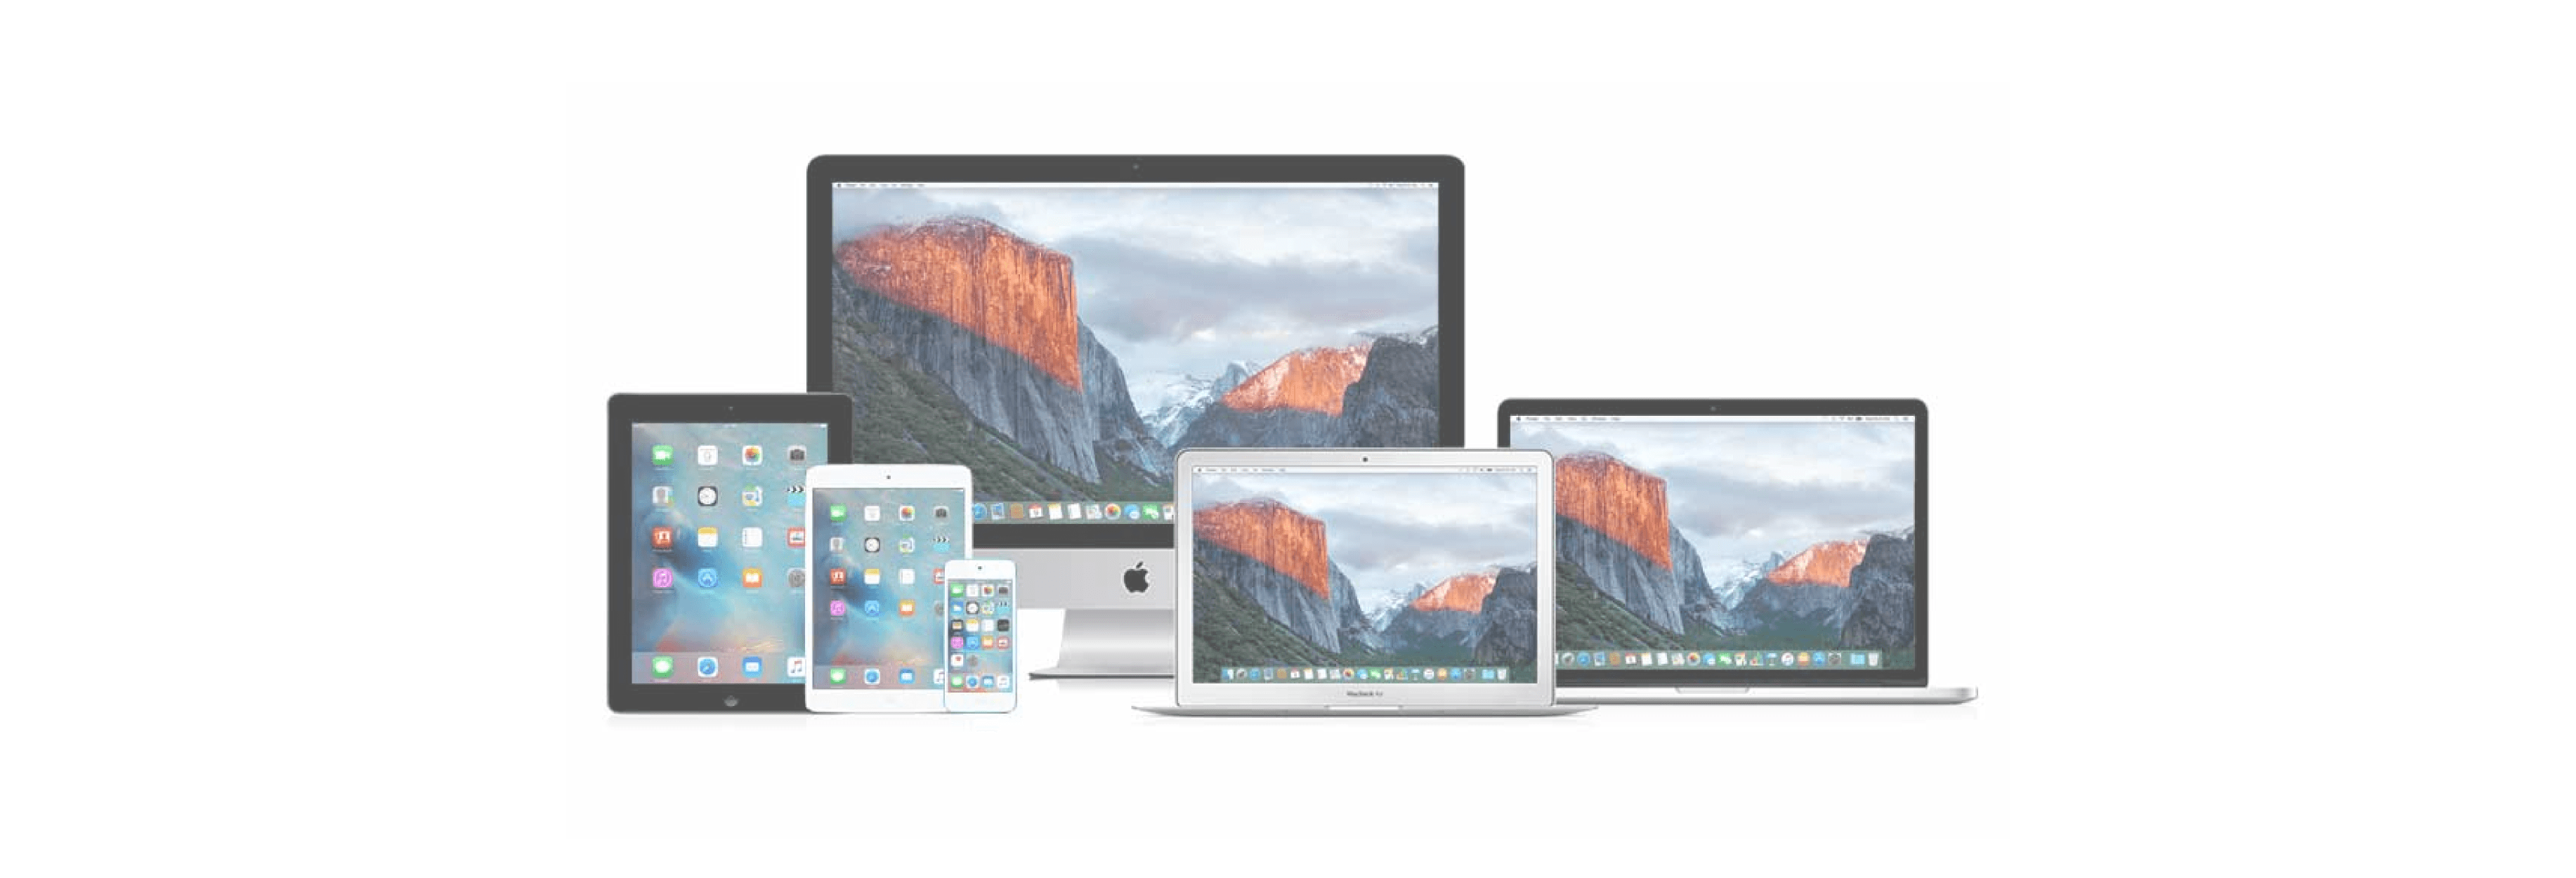 What to Look For When Buying Refurbished Apple Products